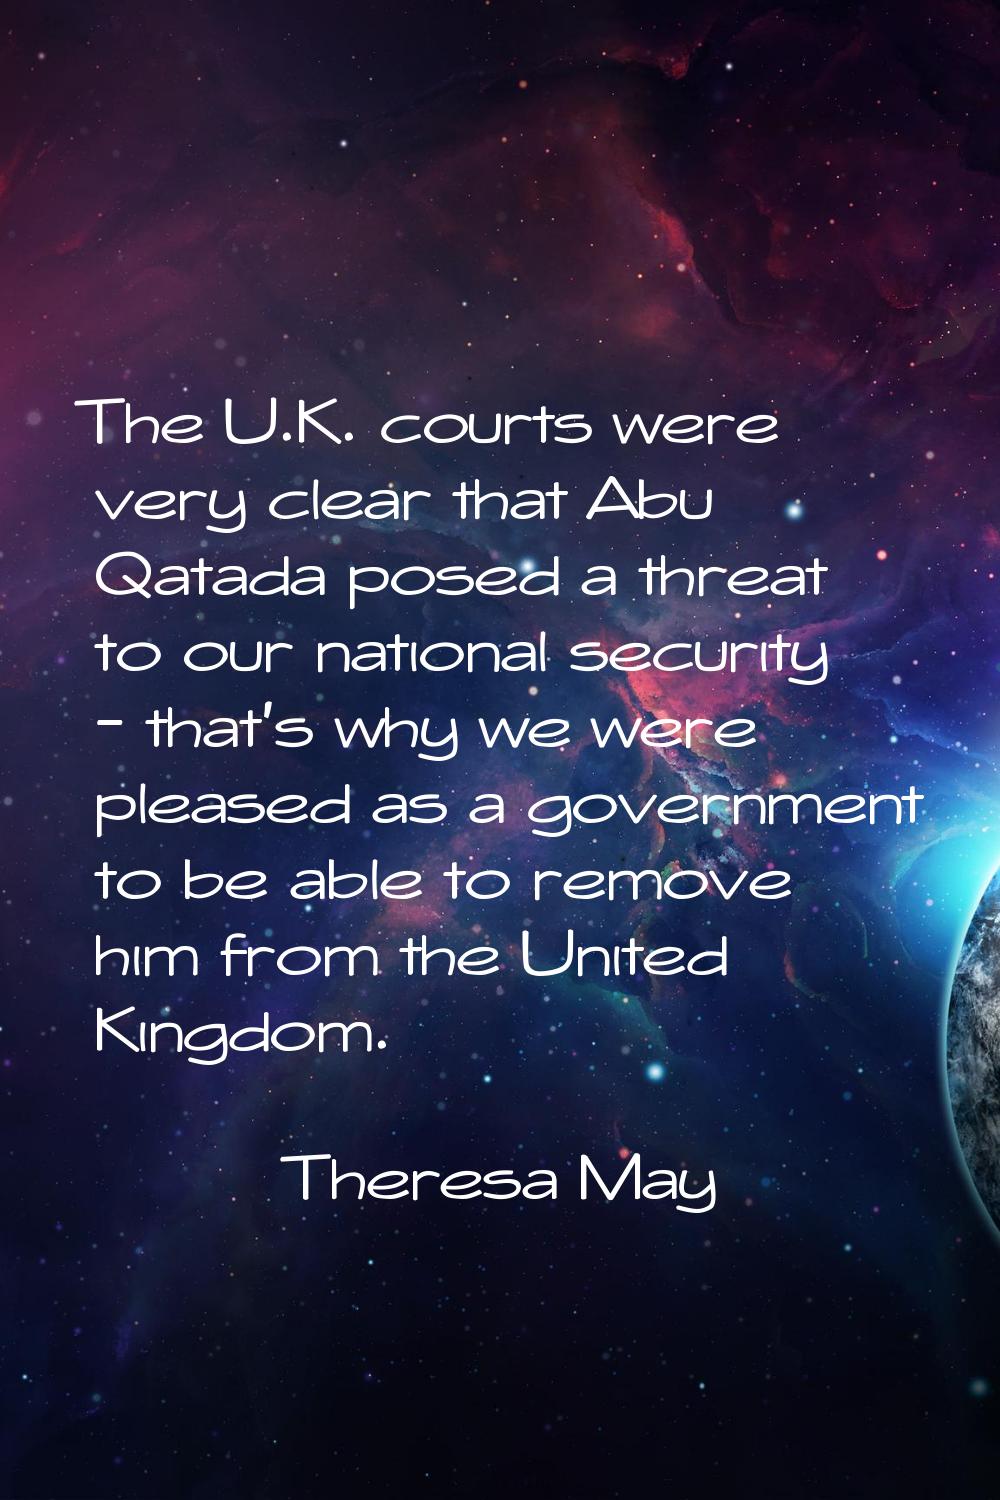 The U.K. courts were very clear that Abu Qatada posed a threat to our national security - that's wh